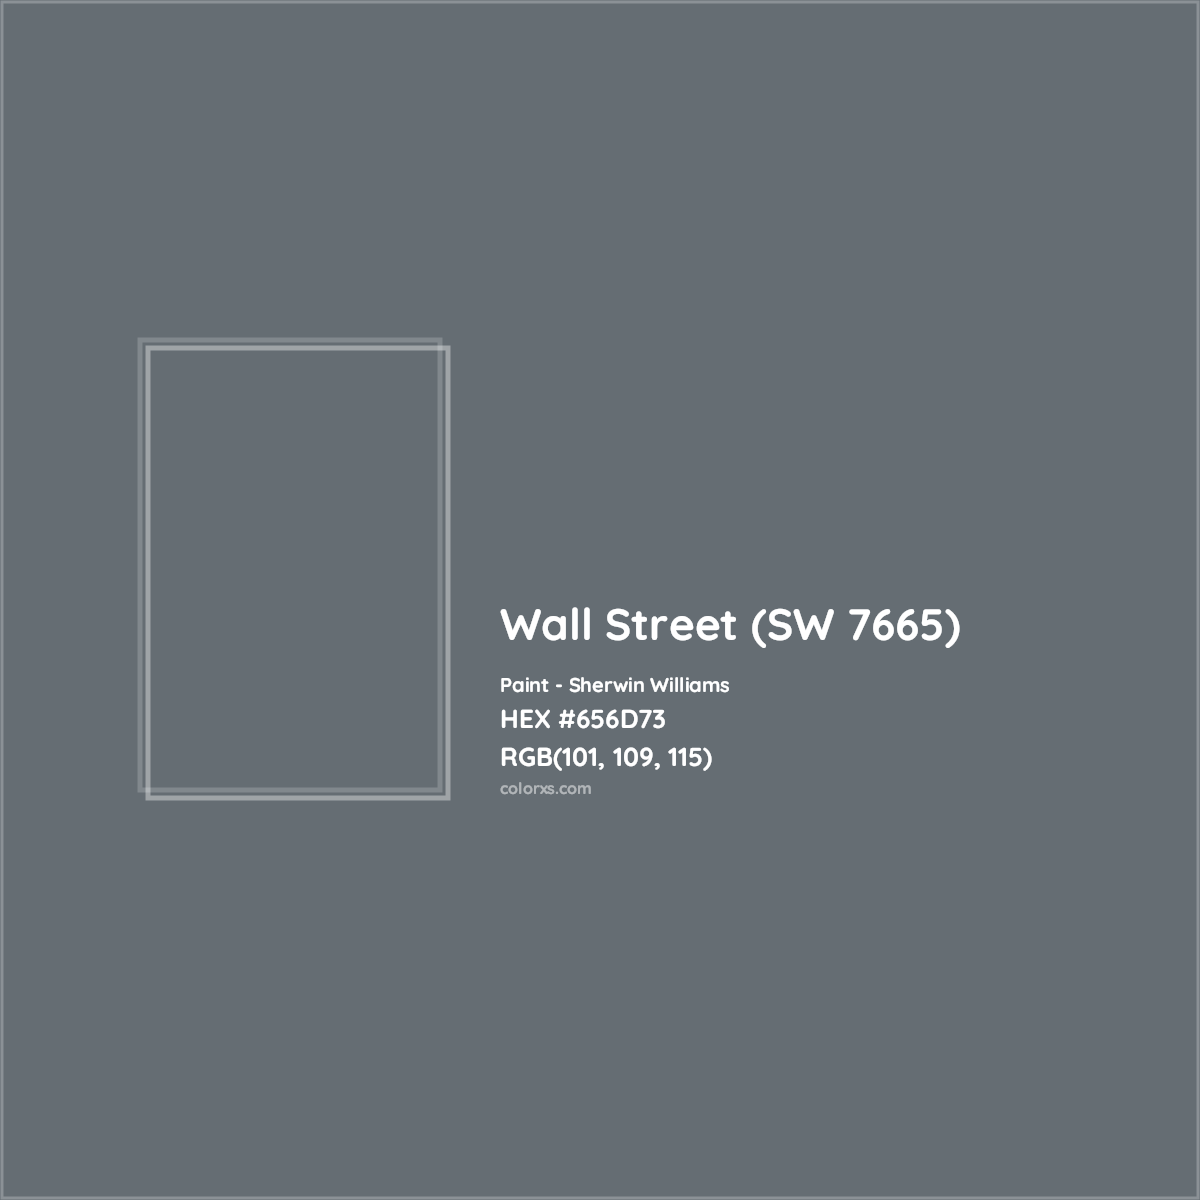 HEX #656D73 Wall Street (SW 7665) Paint Sherwin Williams - Color Code